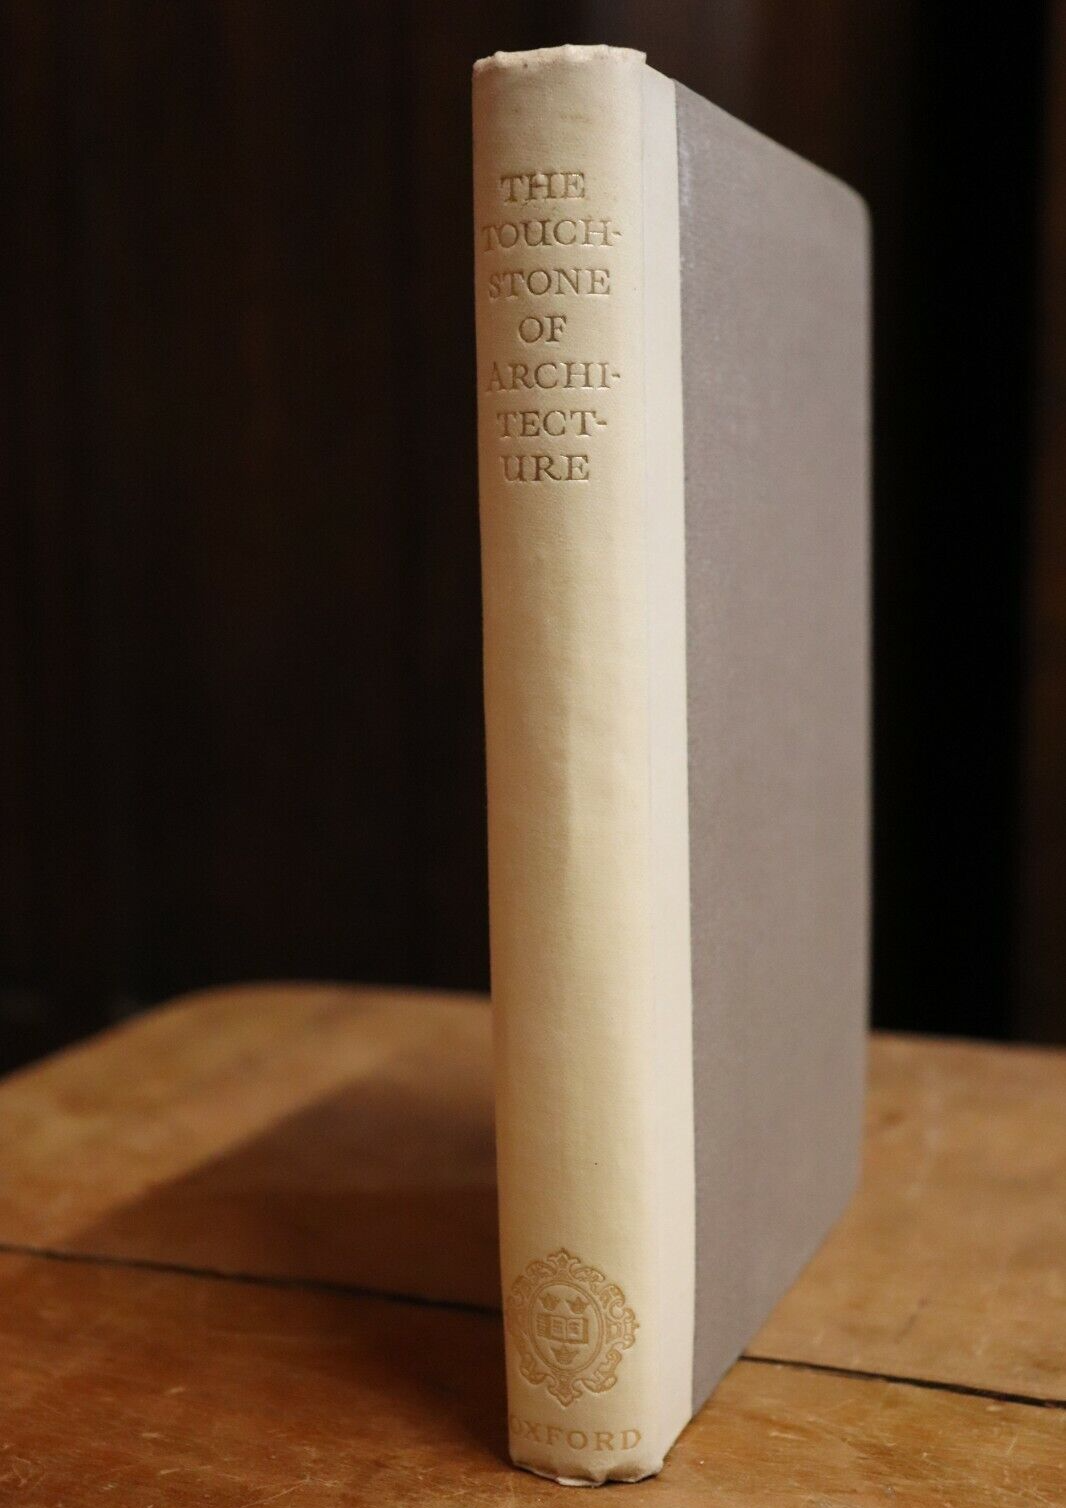 1925 The Touchstone Of Architecture by R Blomfield 1st Edition Antique Book